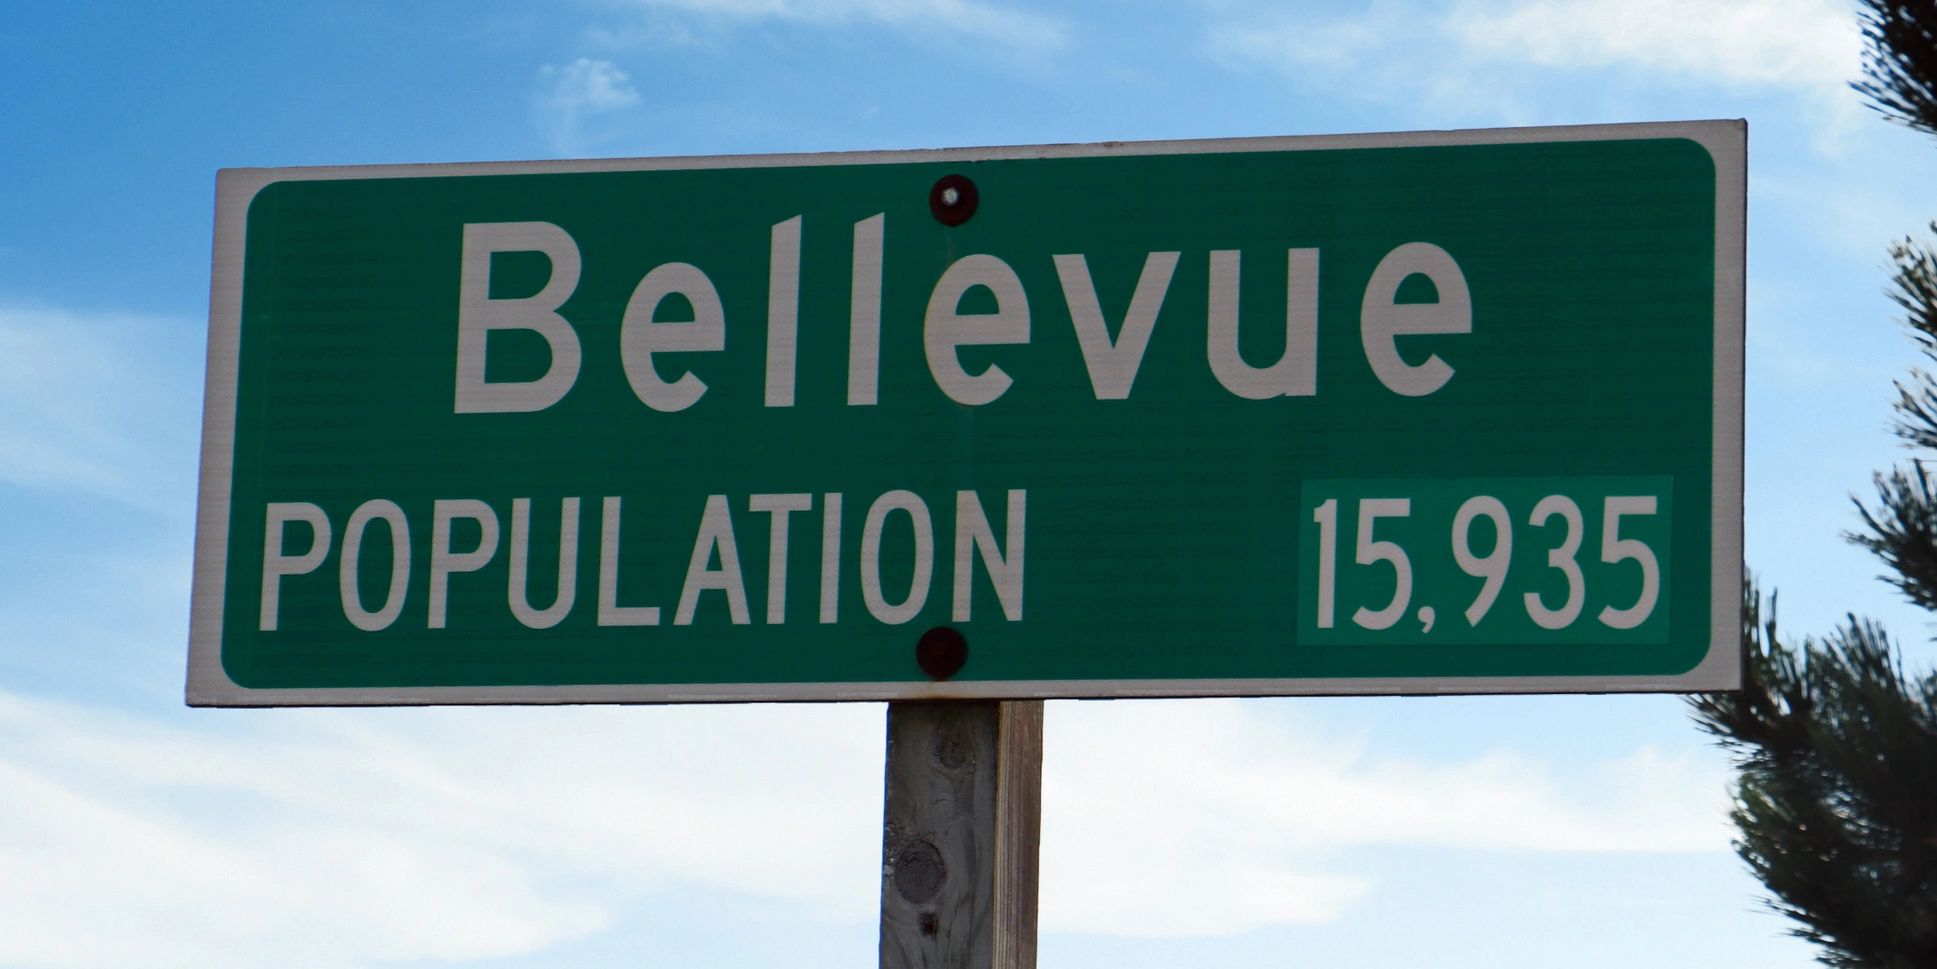 Bellevue Wisconsin 2020 Census Population sign. Photo by Jackie Krull